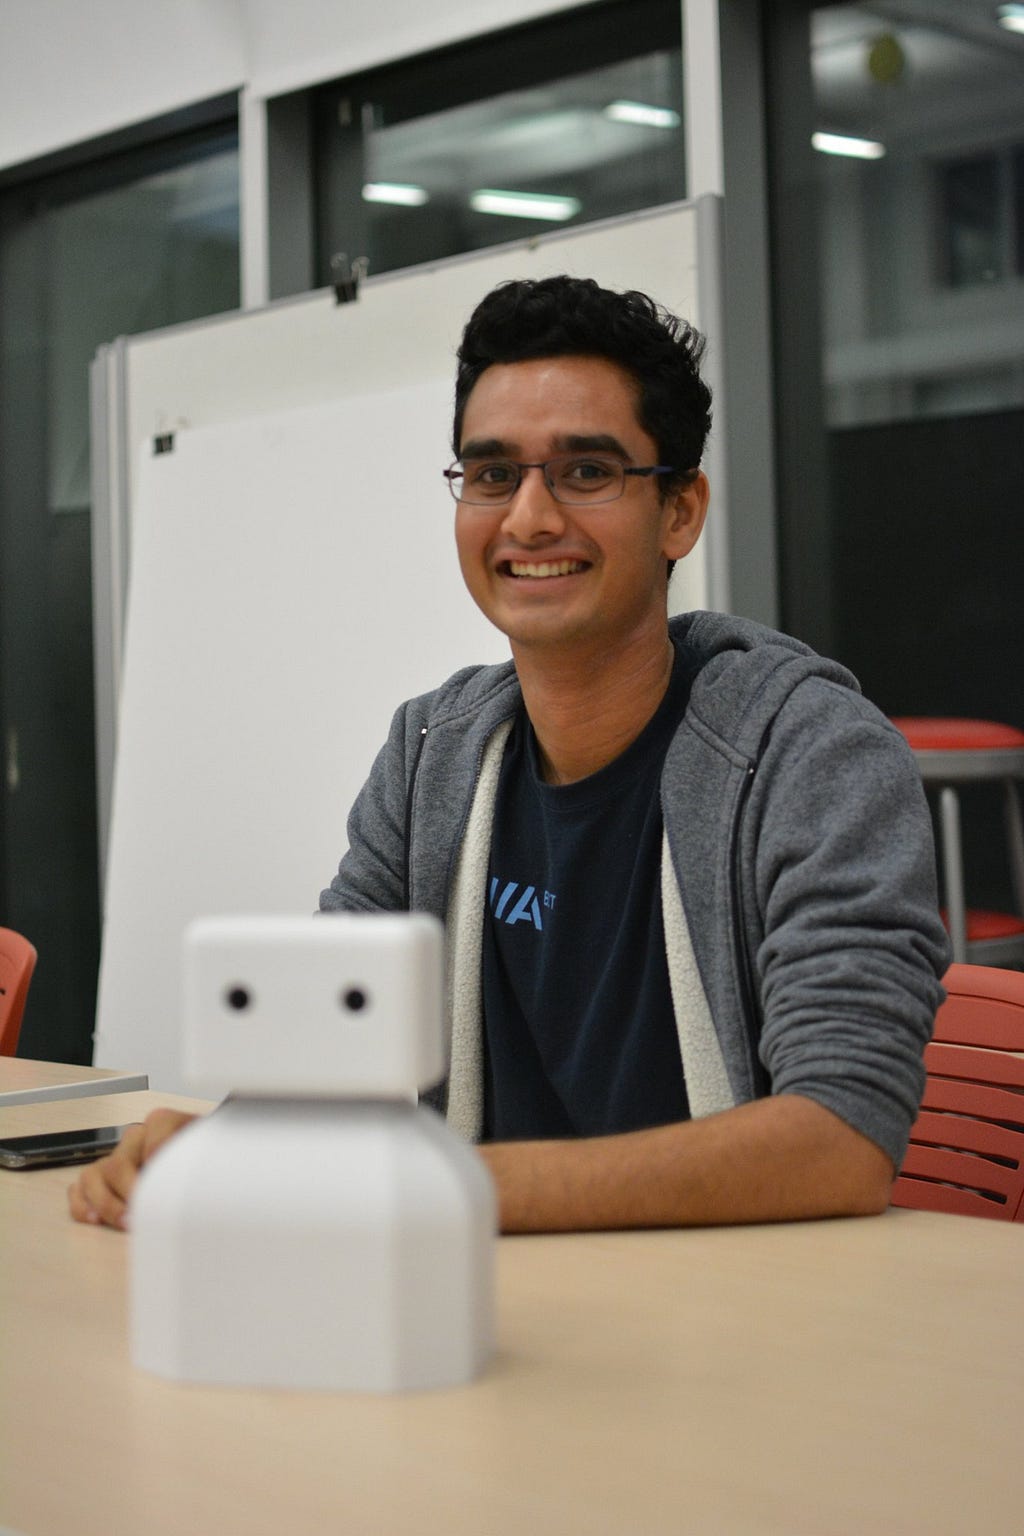 Akhil sits at a table smiling, in front of him is an out of focus robot model.